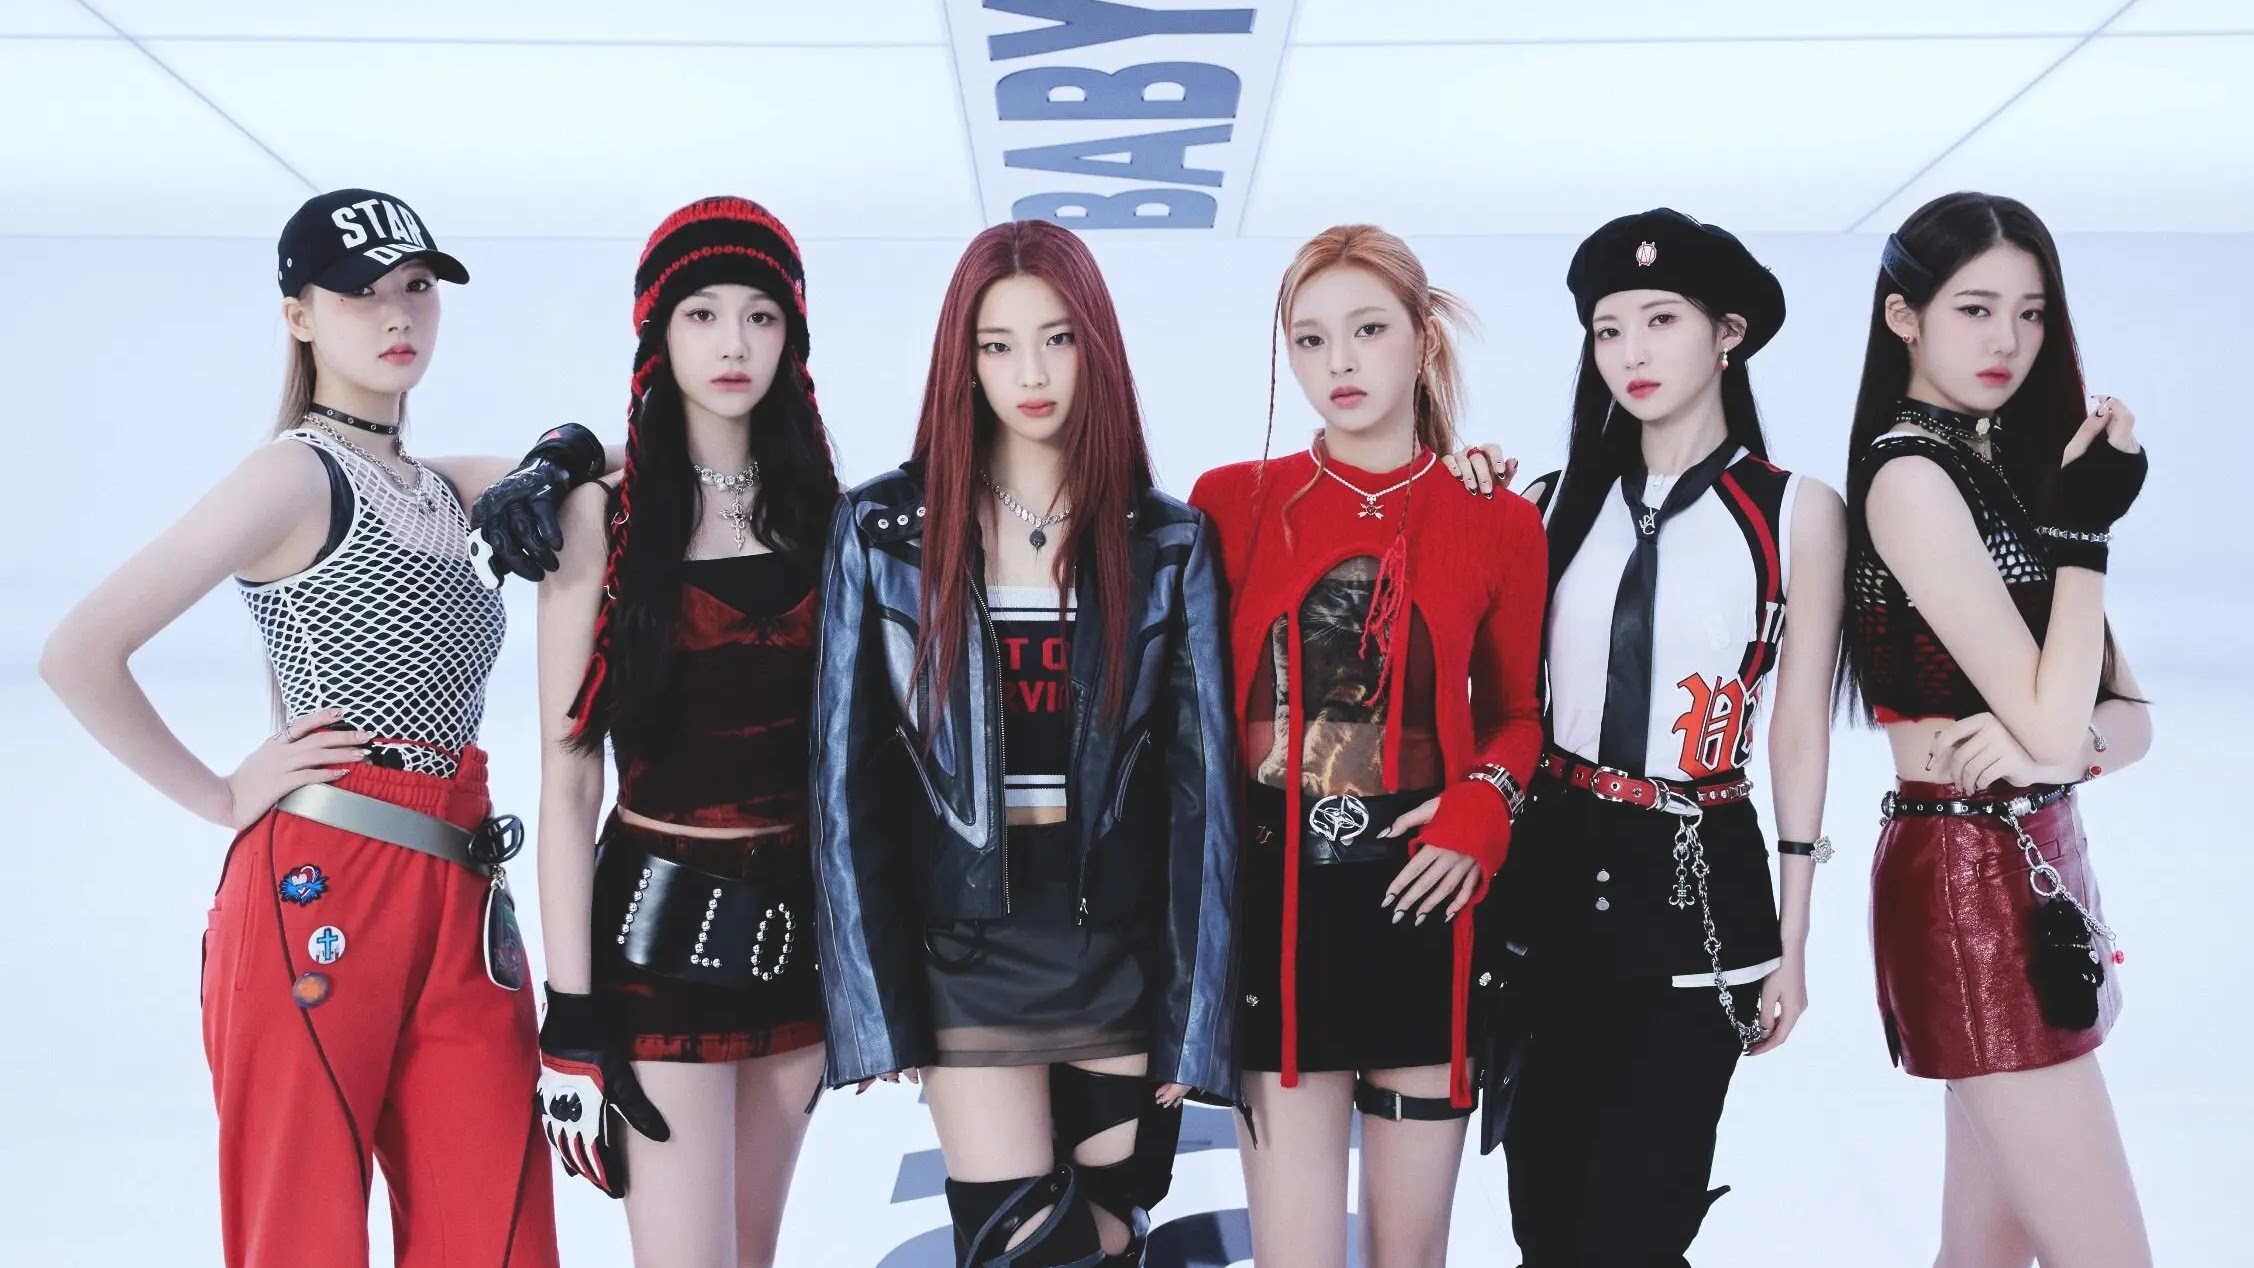 After BABYMONSTER's Debut, This Netizen Compares YG's Concept with SM Entertainment